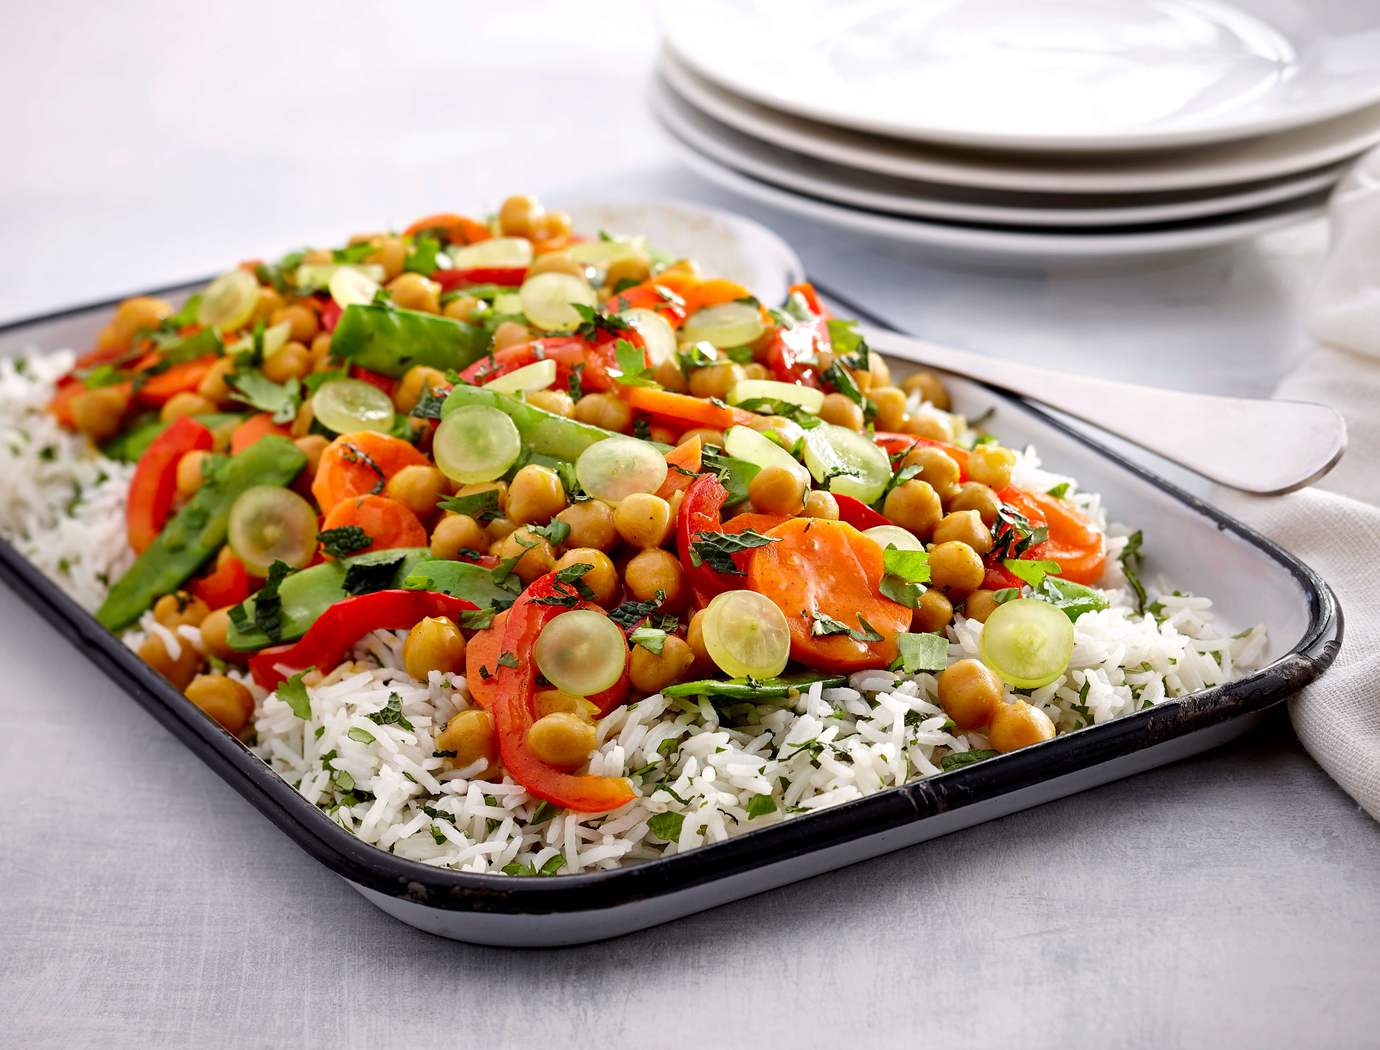 Basmati rice with honey and curry chickpeas